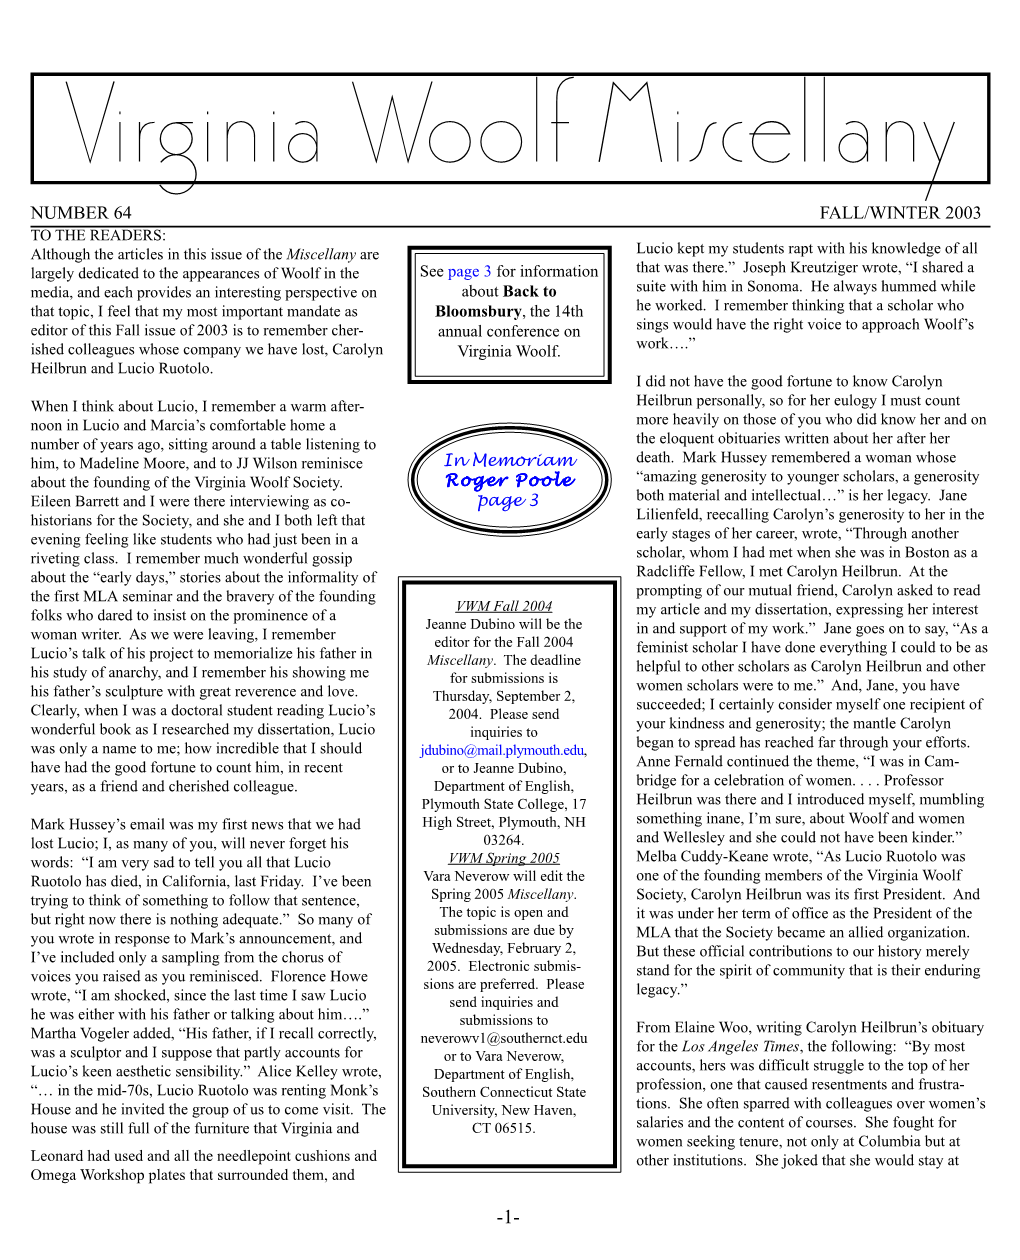 Virginia Woolf Miscellany, Issue 64, Fall 2003